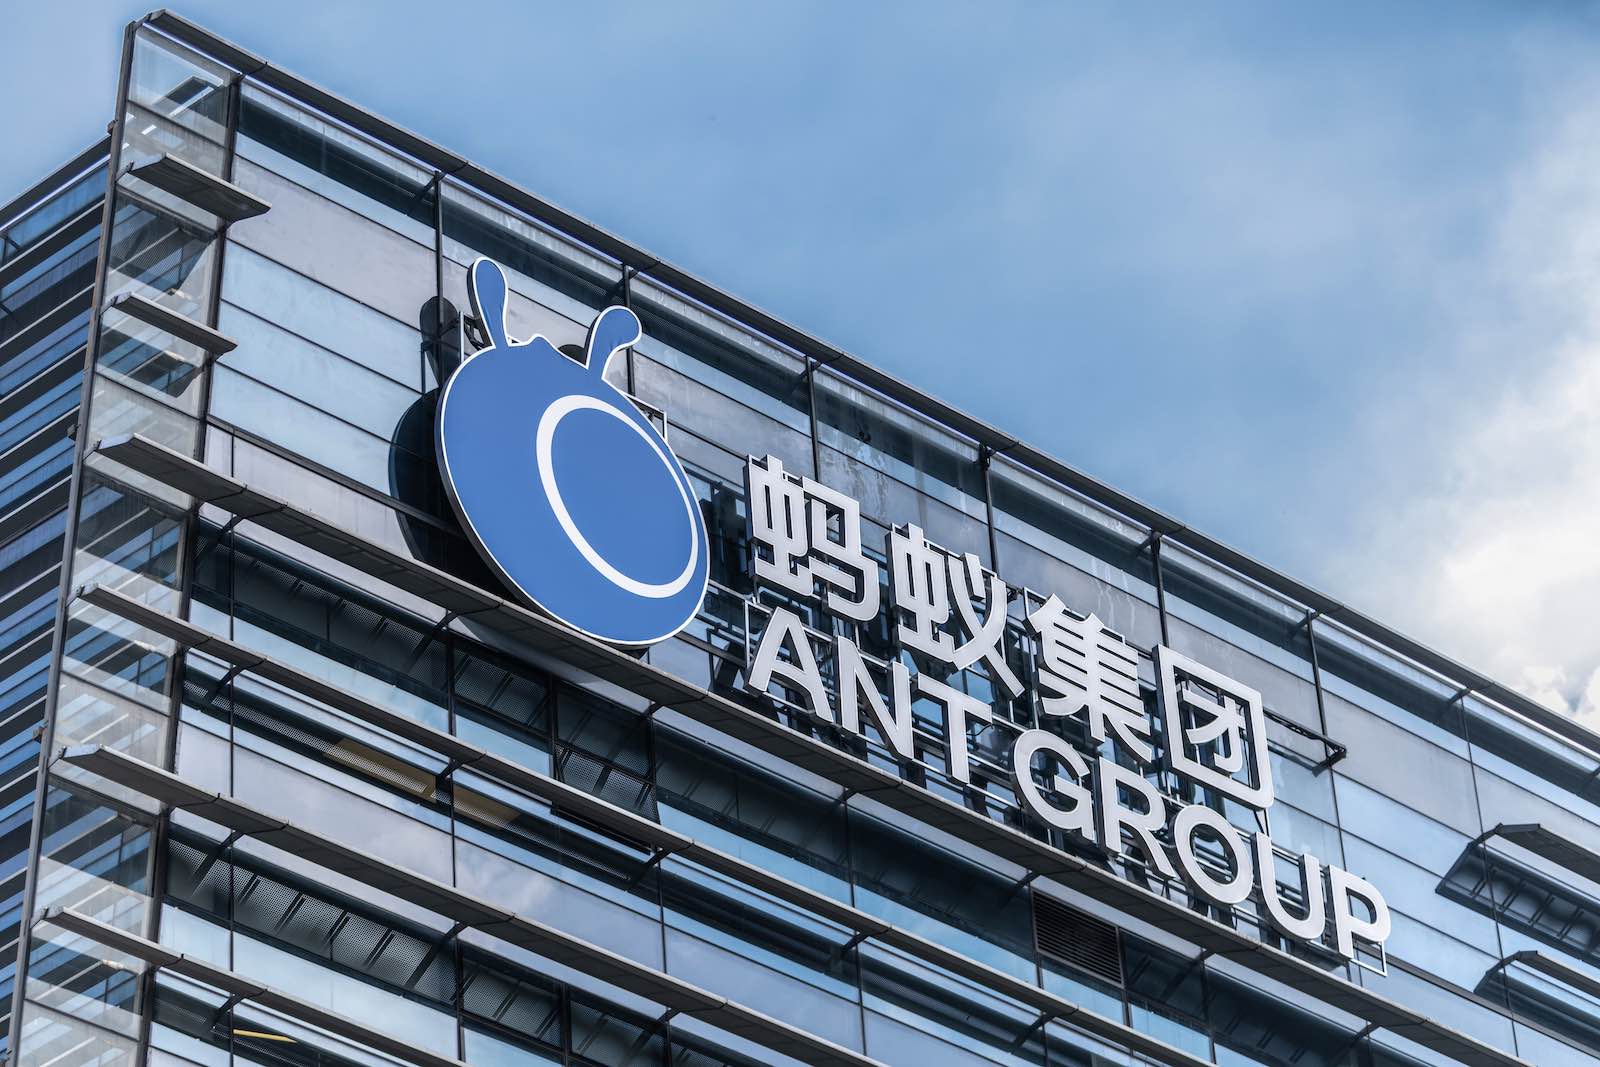 Ant Group invested $2.9 billion in tech research last year.